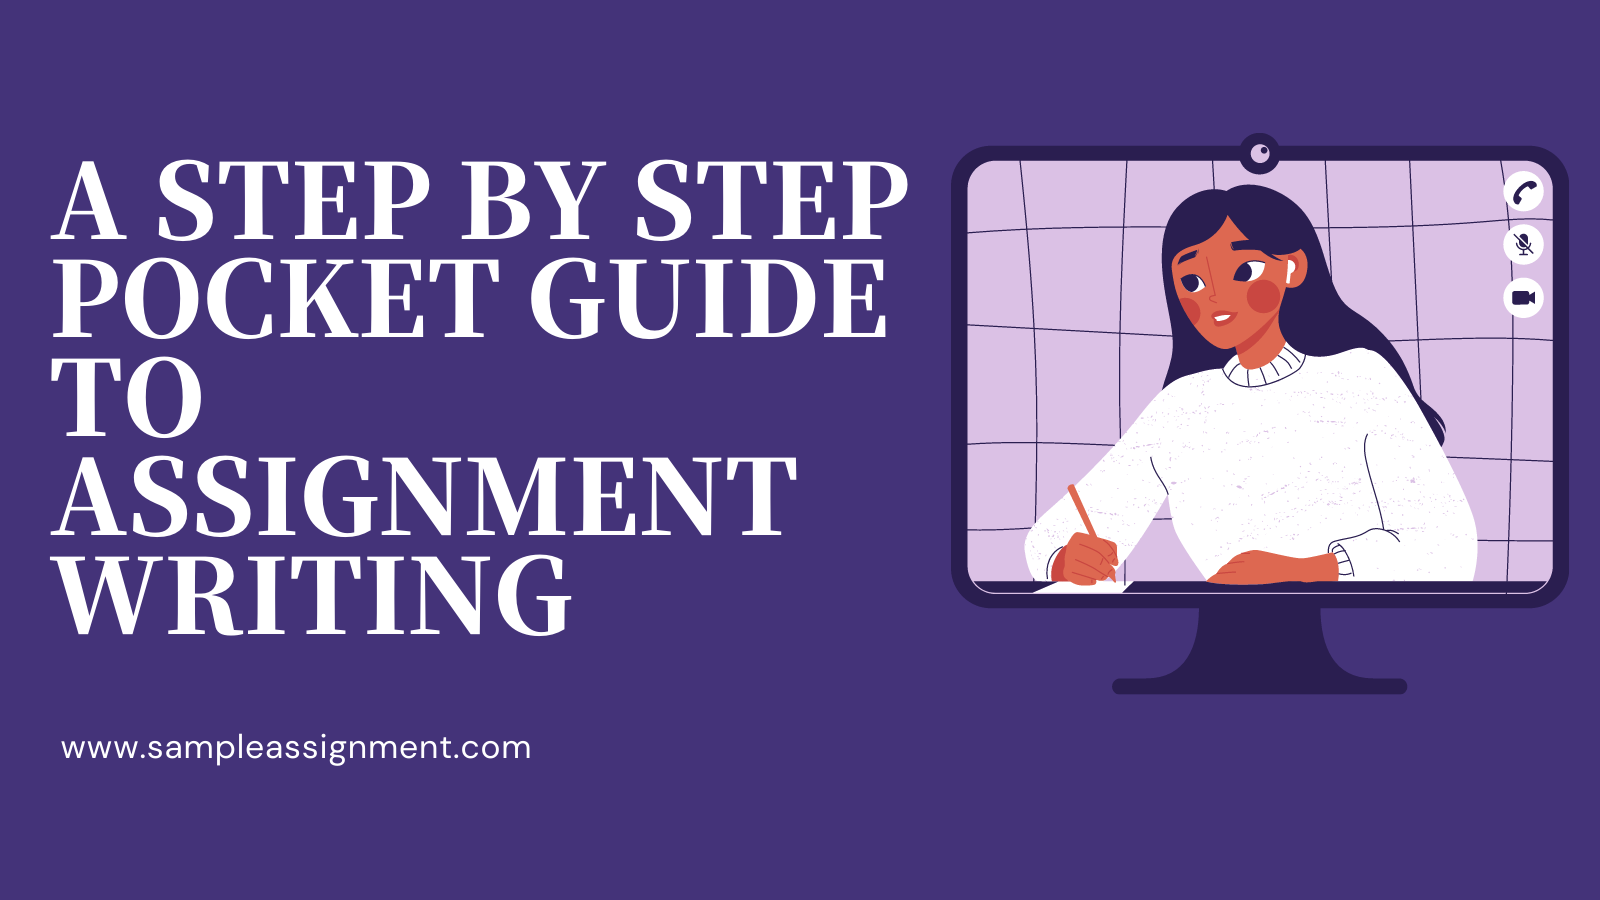 A STEP BY STEP POCKET GUIDE TO ASSIGNMENT WRITING